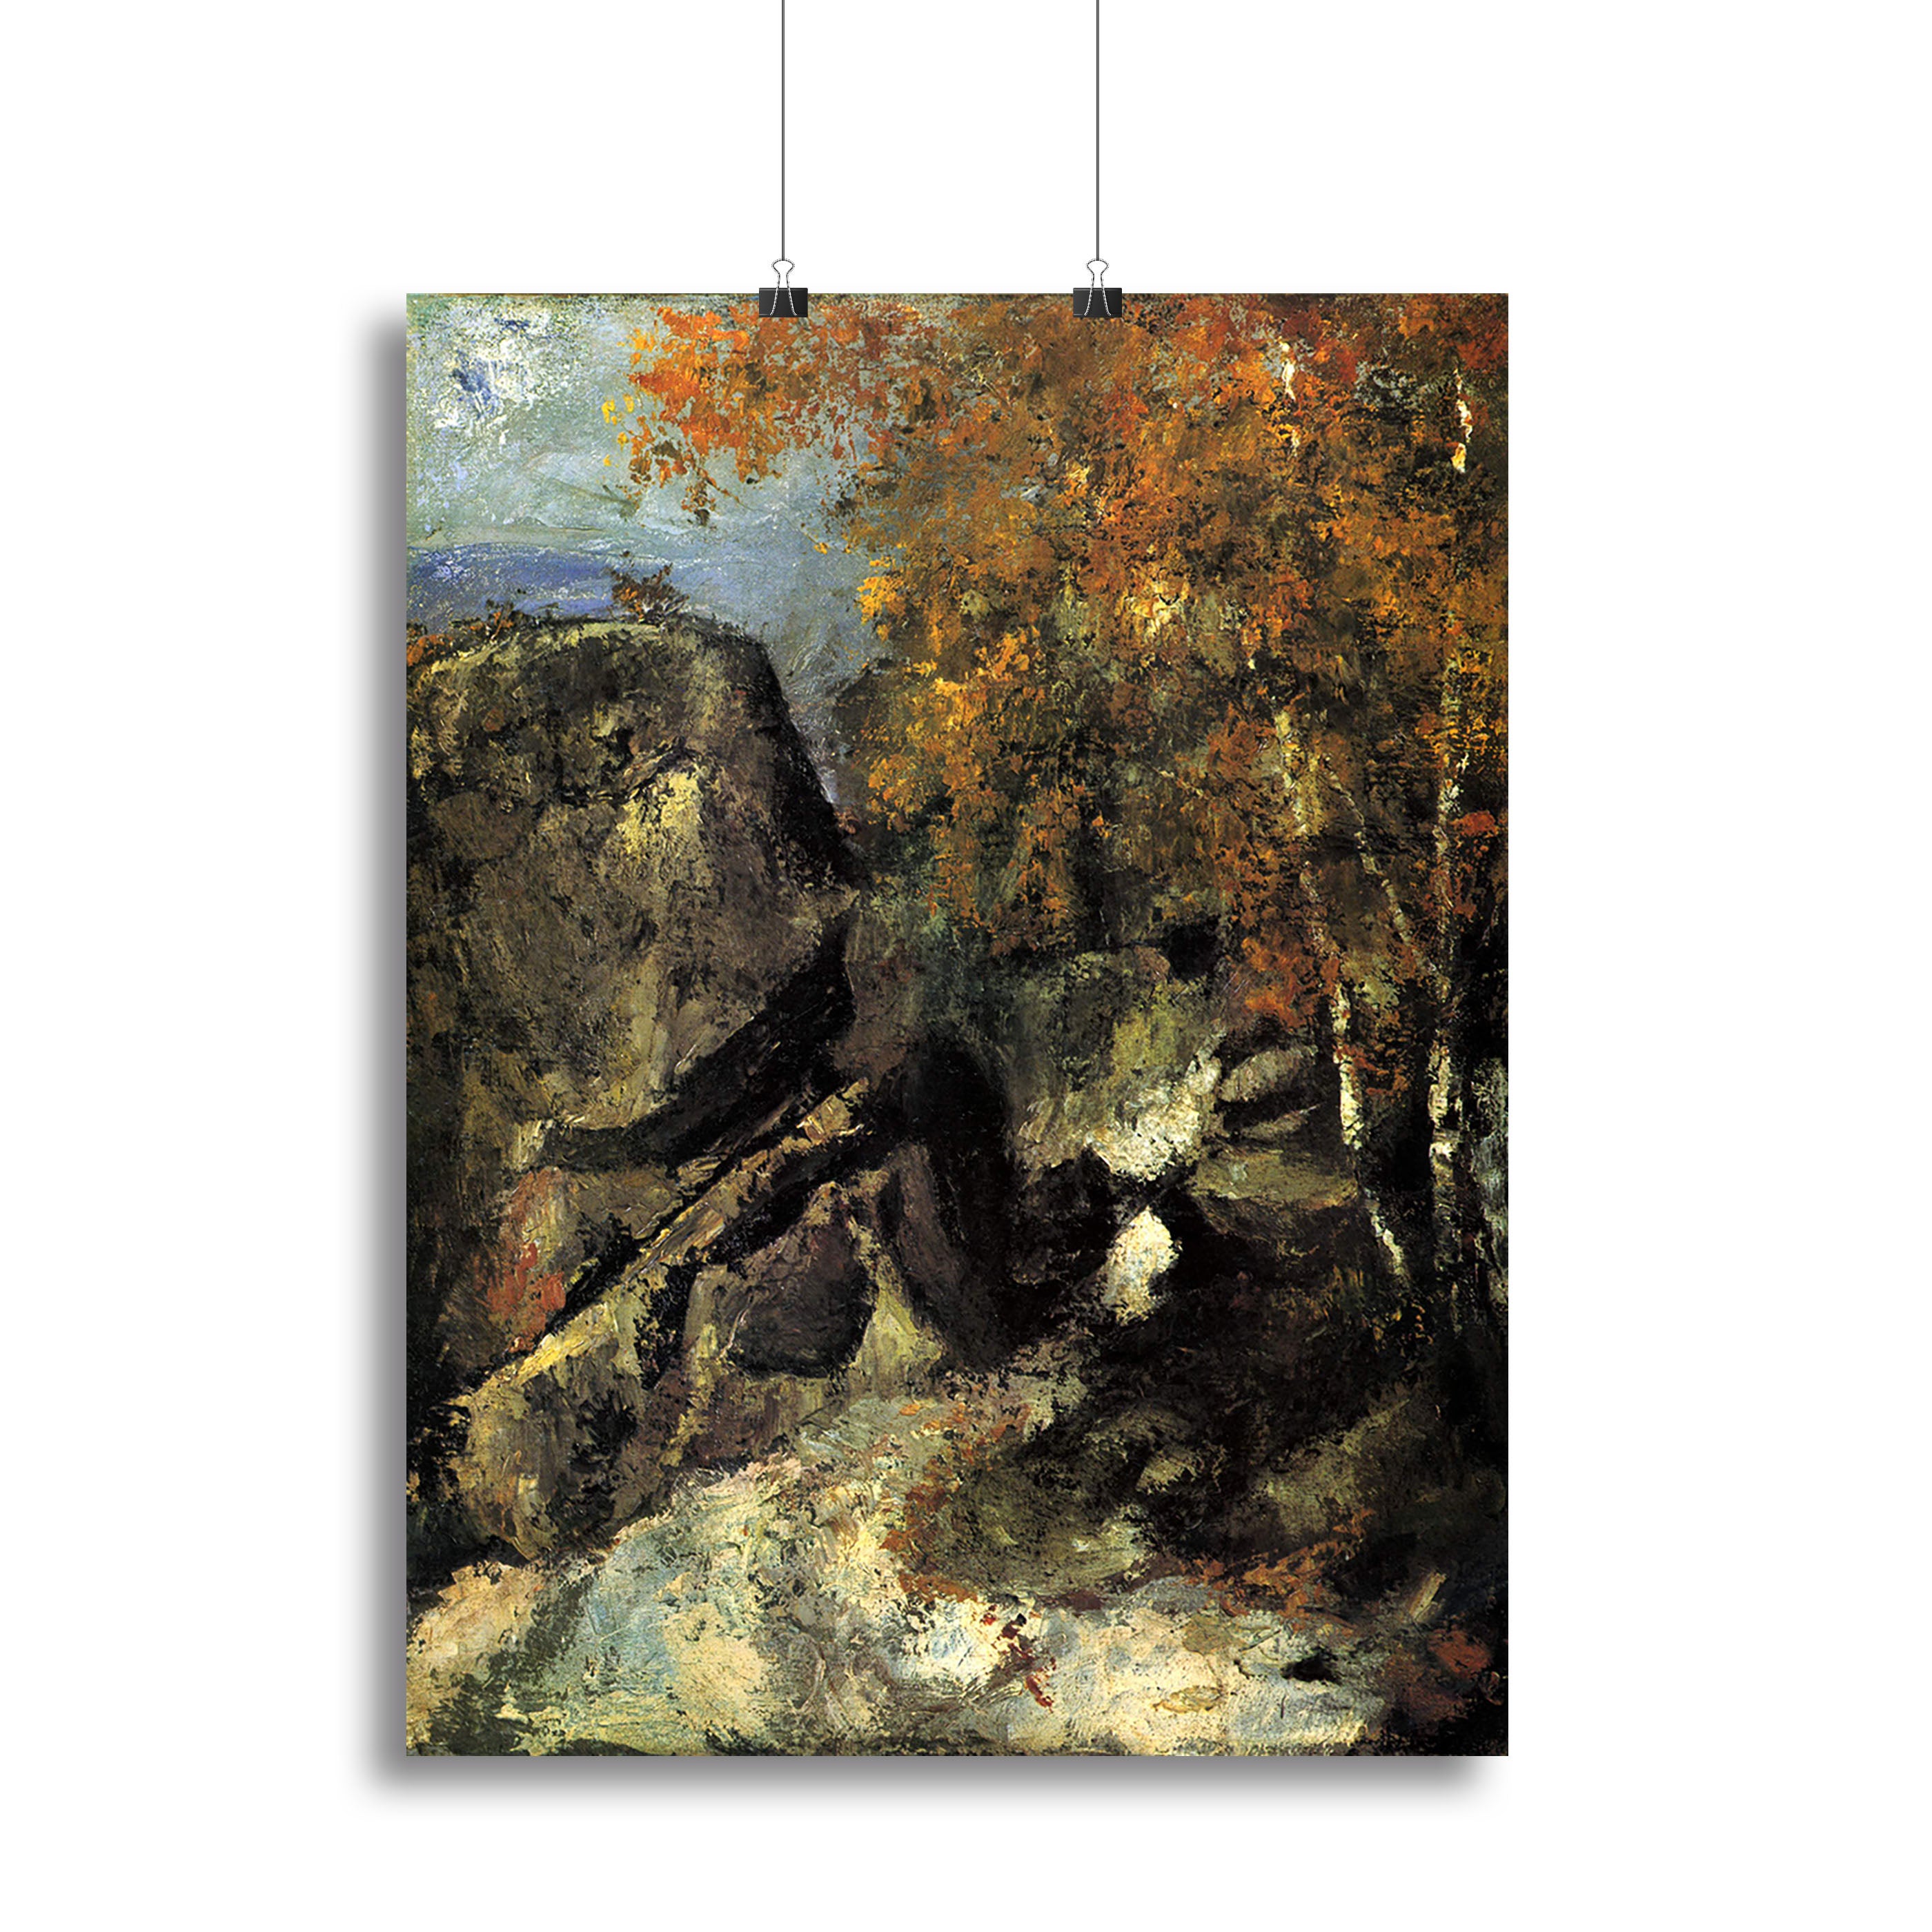 Rocks in Fountanbleu Forest by Cezanne Canvas Print or Poster - Canvas Art Rocks - 2